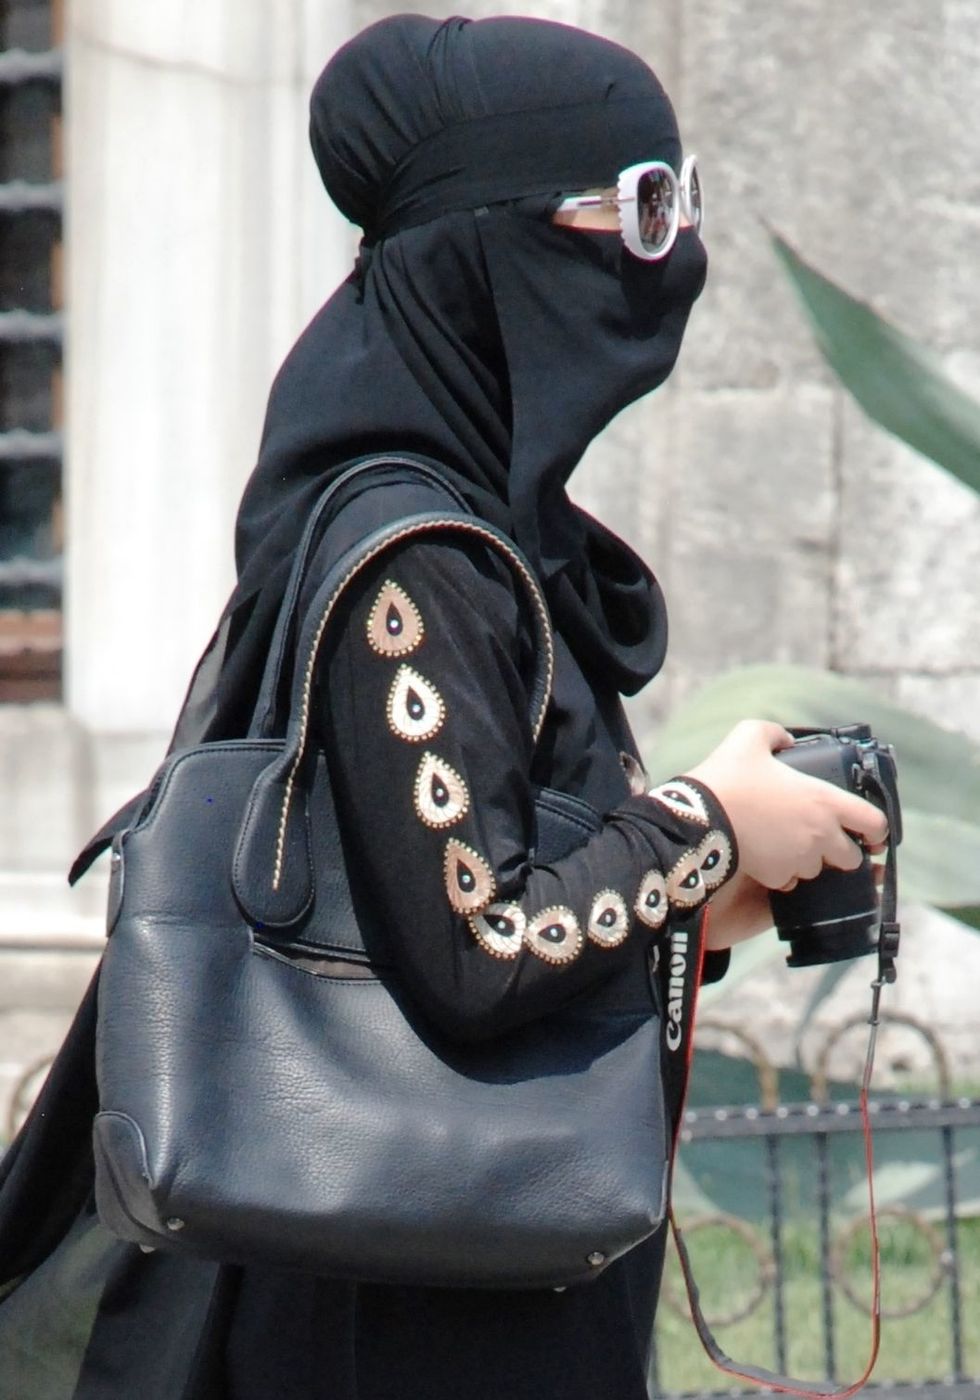 Denmark's Ban on the Niqab Is Actually A Big Deal